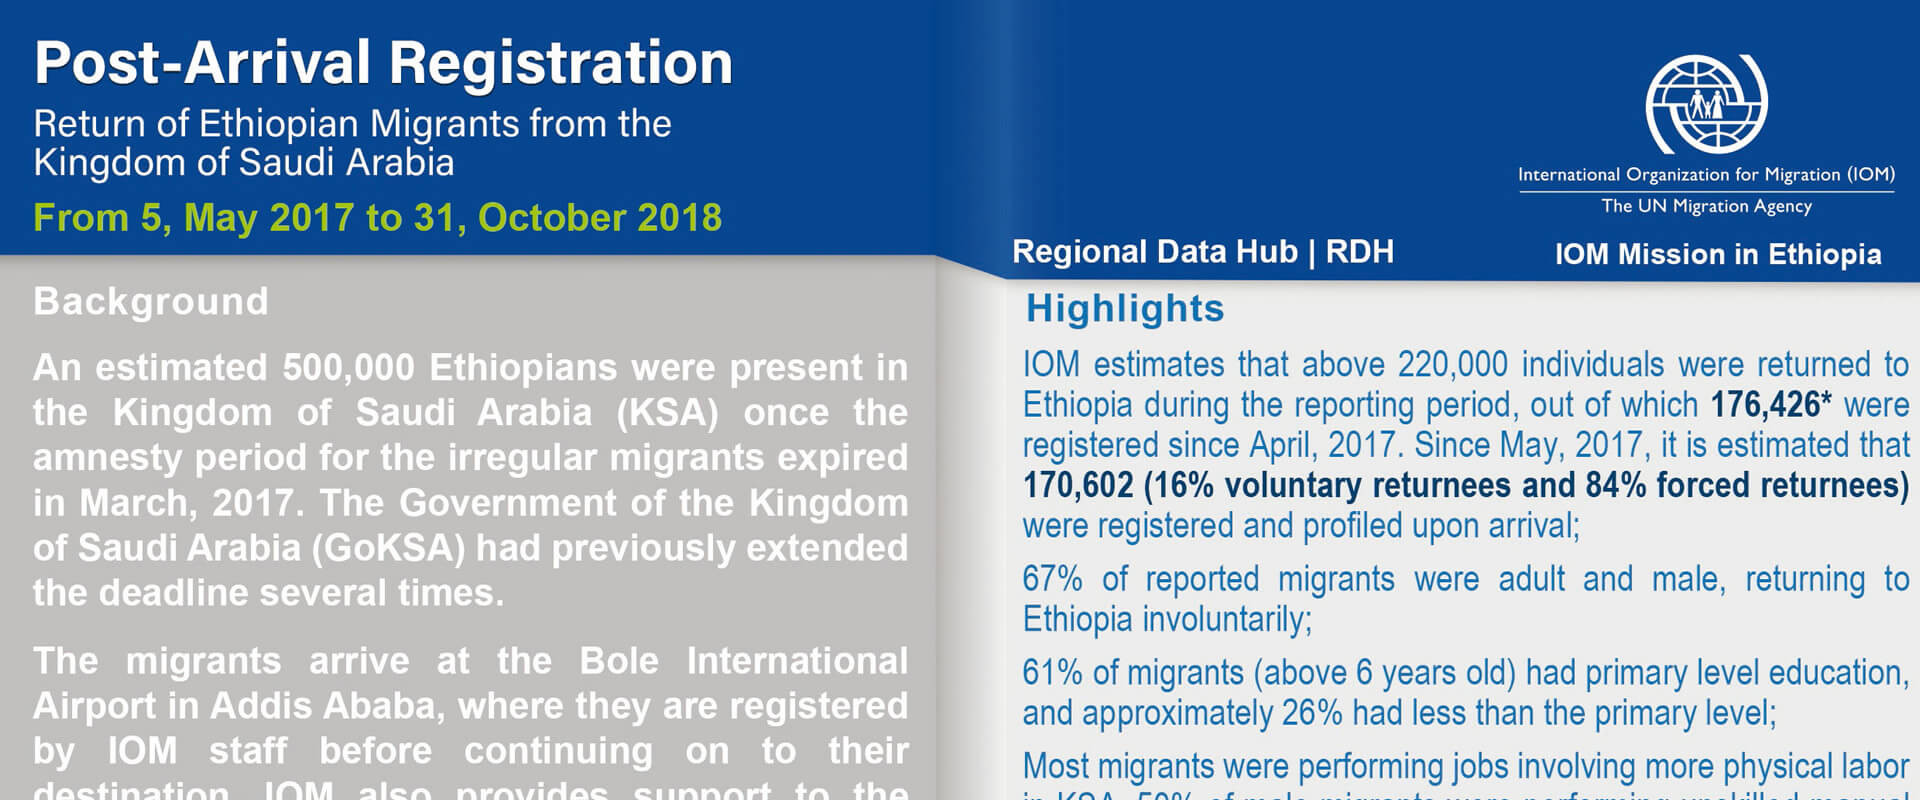 Post Arrival Registration - Return of Ethiopian Migrants from the Kingdom of Saudi Arabia (From 5 May 2017 to 31 October 2018)